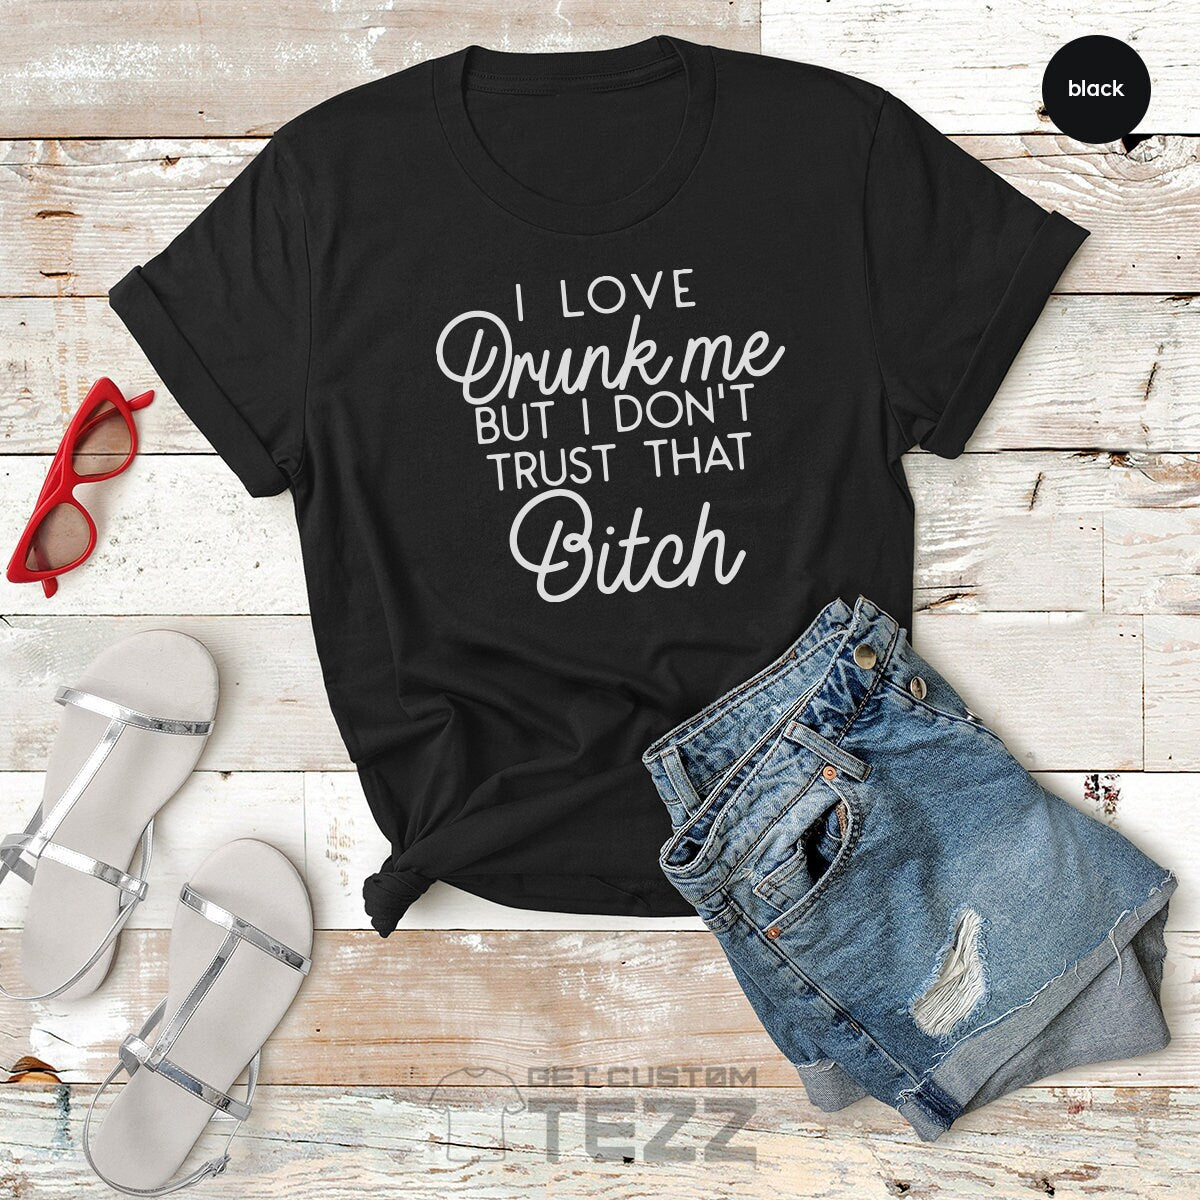 Super Bitch Ladies Fitted T shirt, Funny Novelty Tee shirt, Women's T shirt